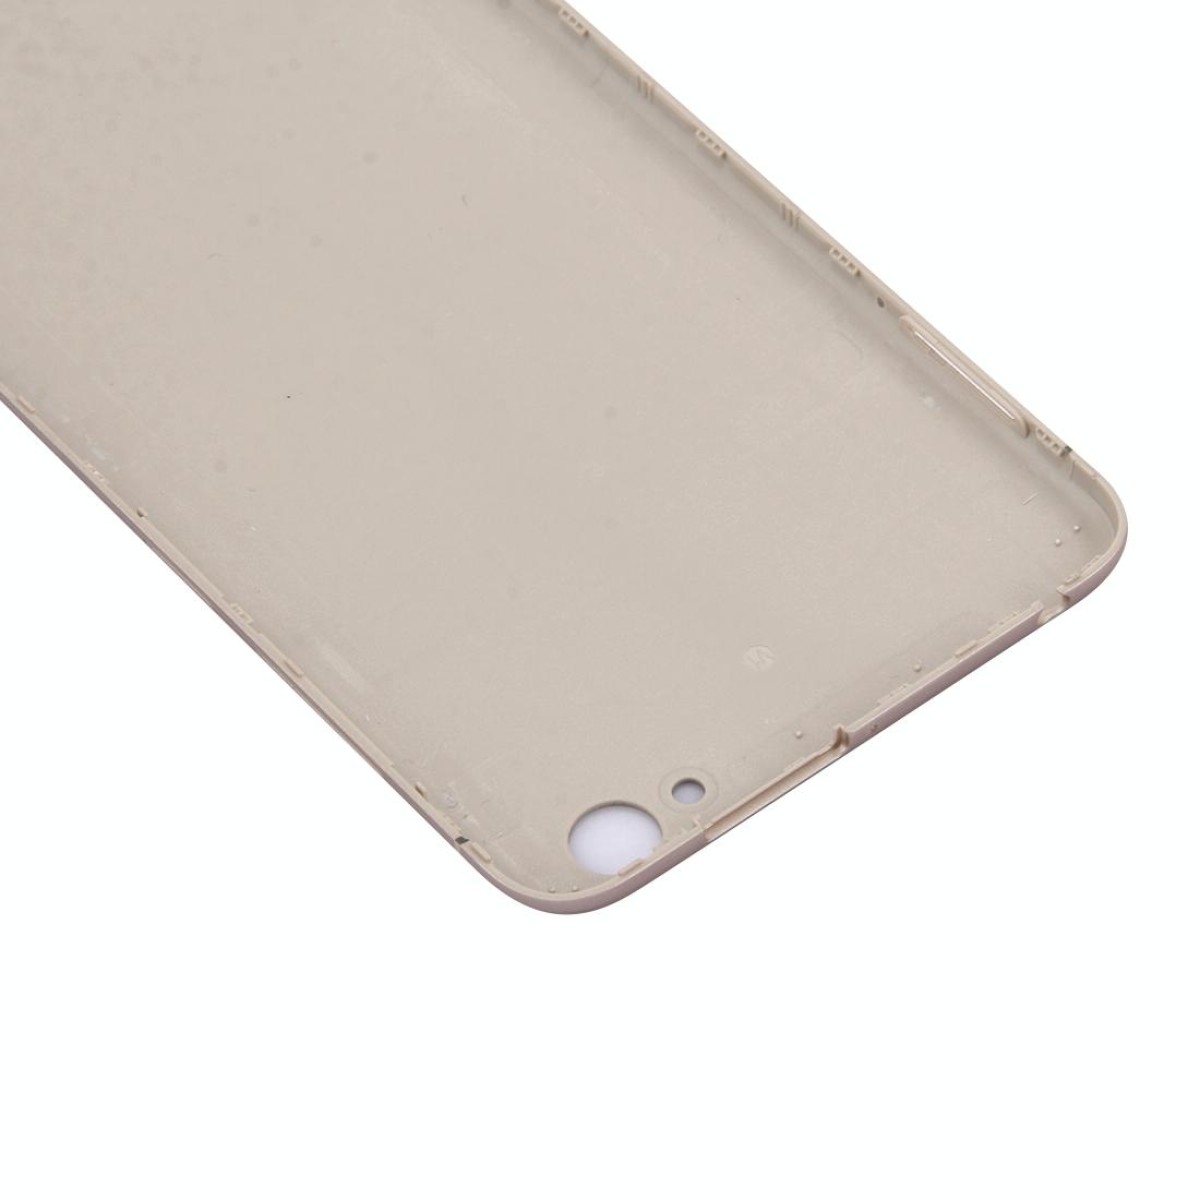 For Vivo Y55 Battery Back Cover (Gold)